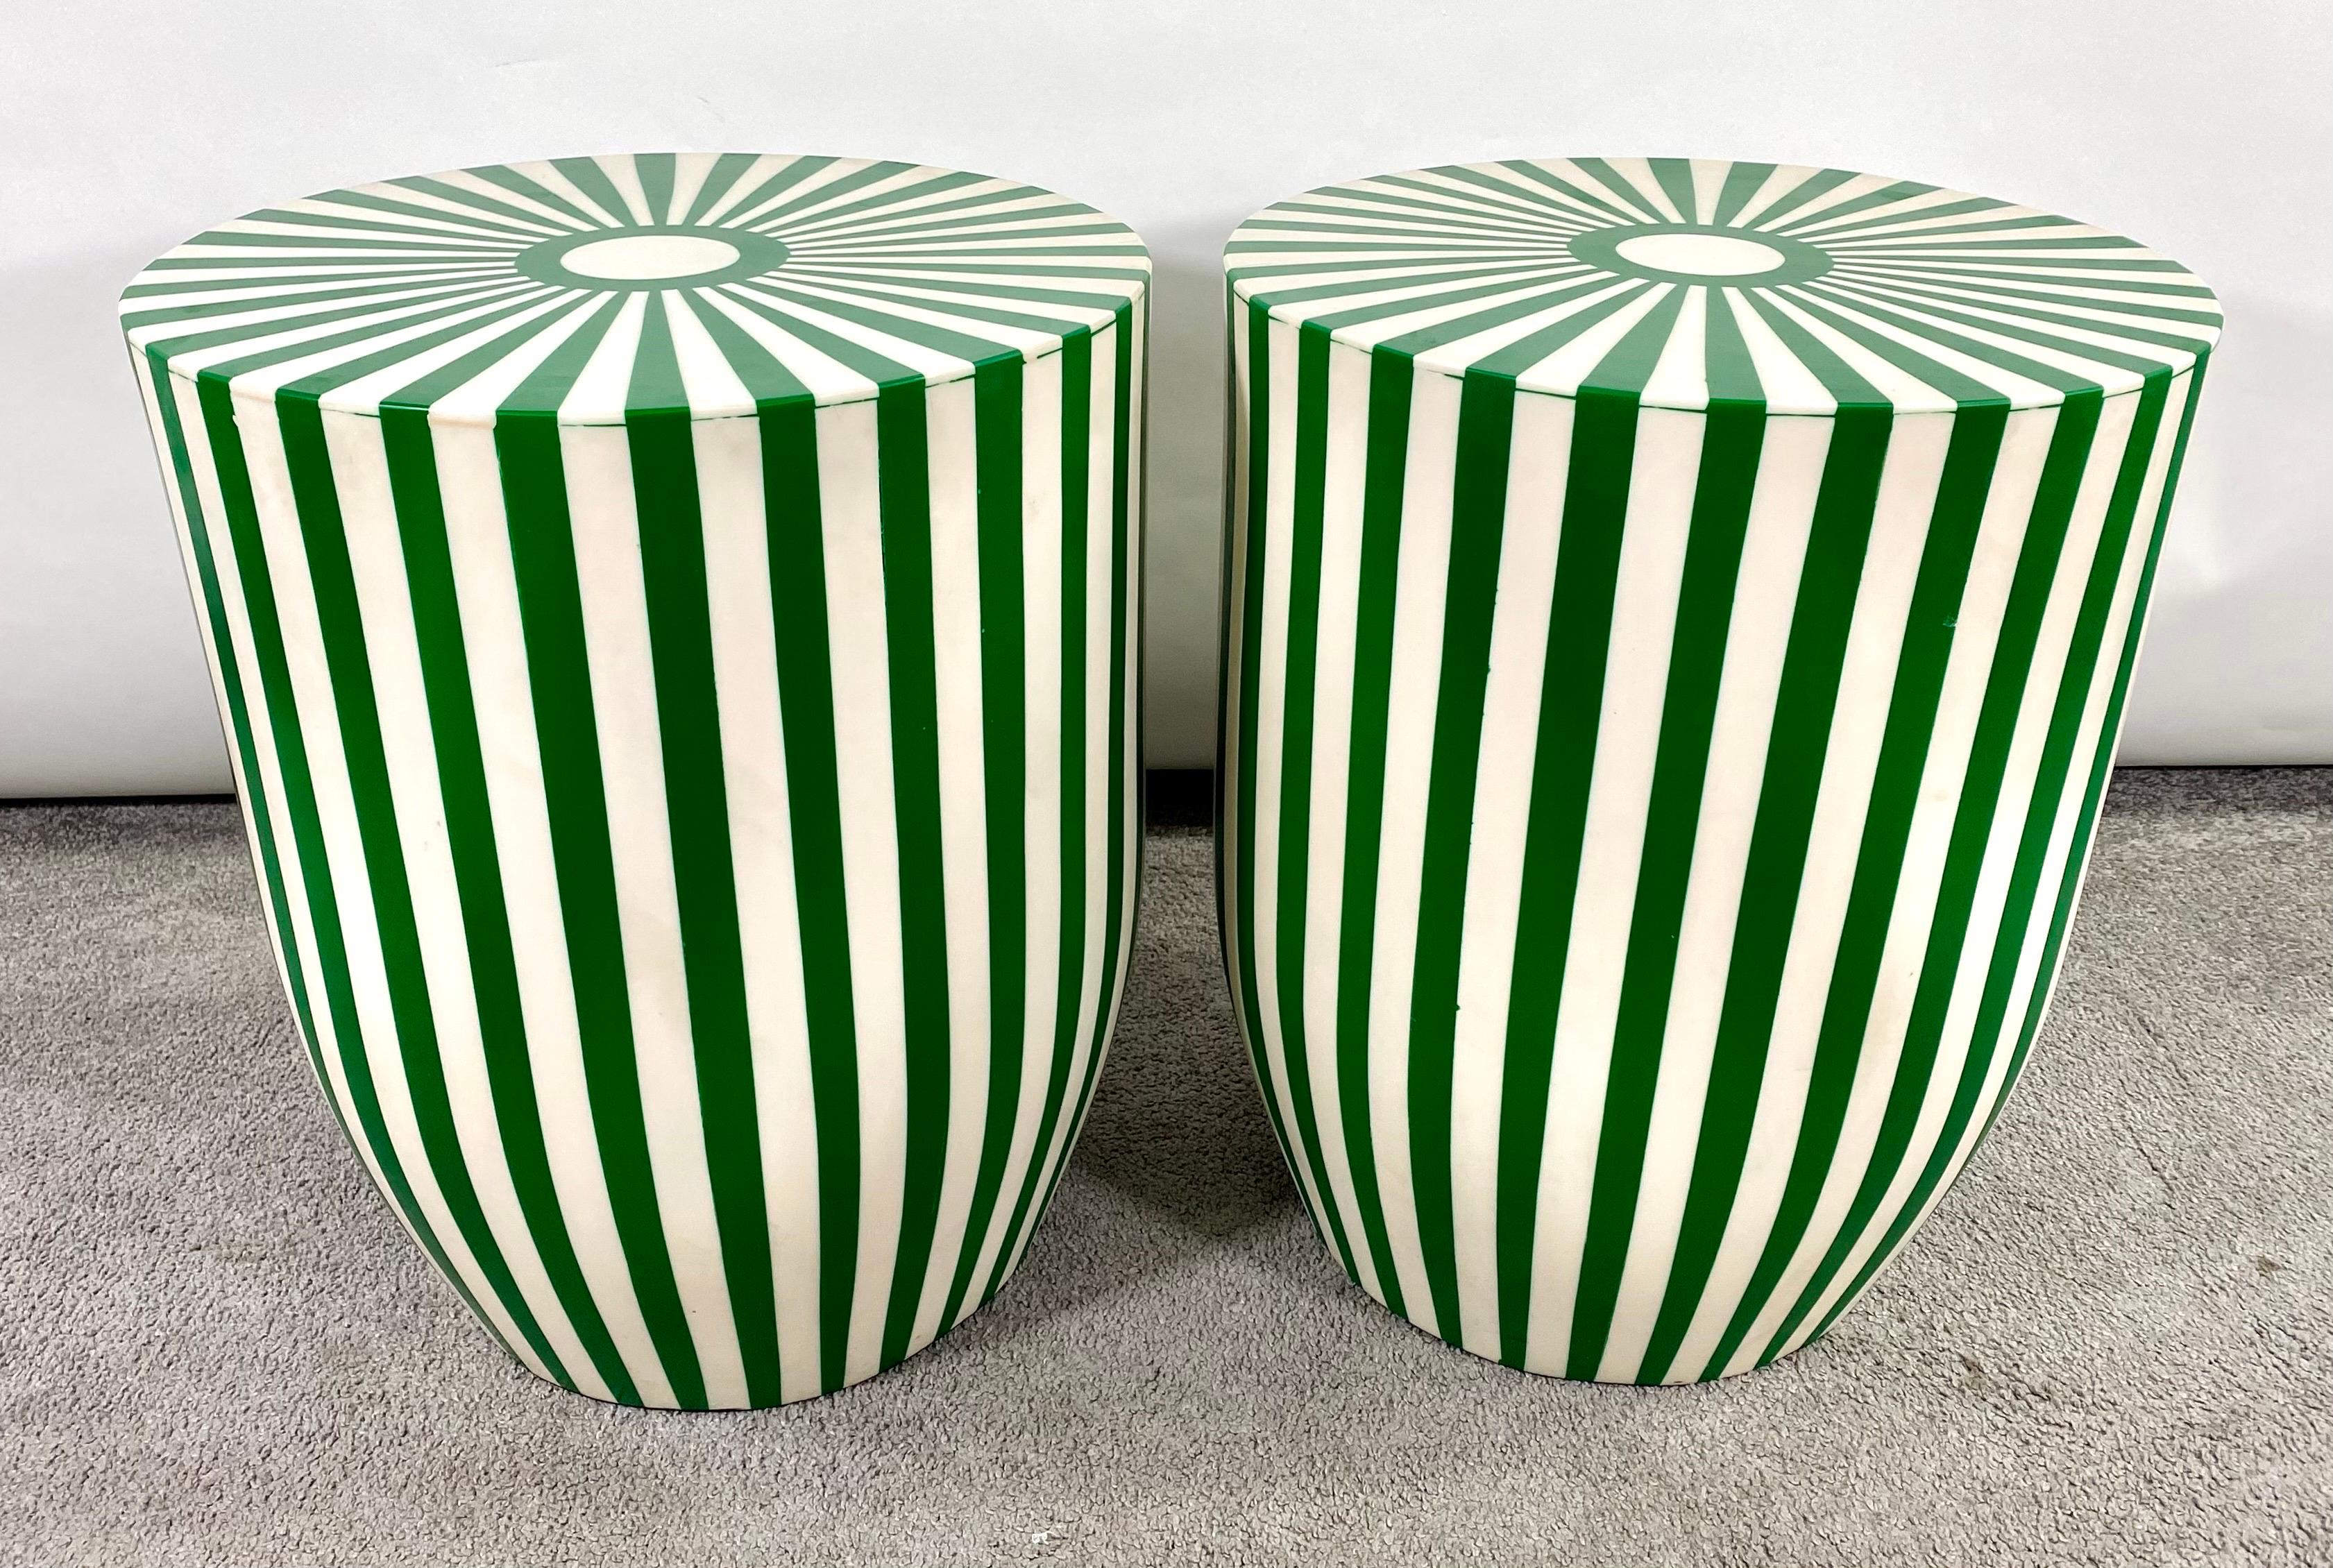 An exquisite pair of Art Deco style green and white side tables or stools featuring a striped design. The tables are made of quality resin and have a solid and sturdy structure. The sculptural cylindrical shaped tables or stools have a round top and